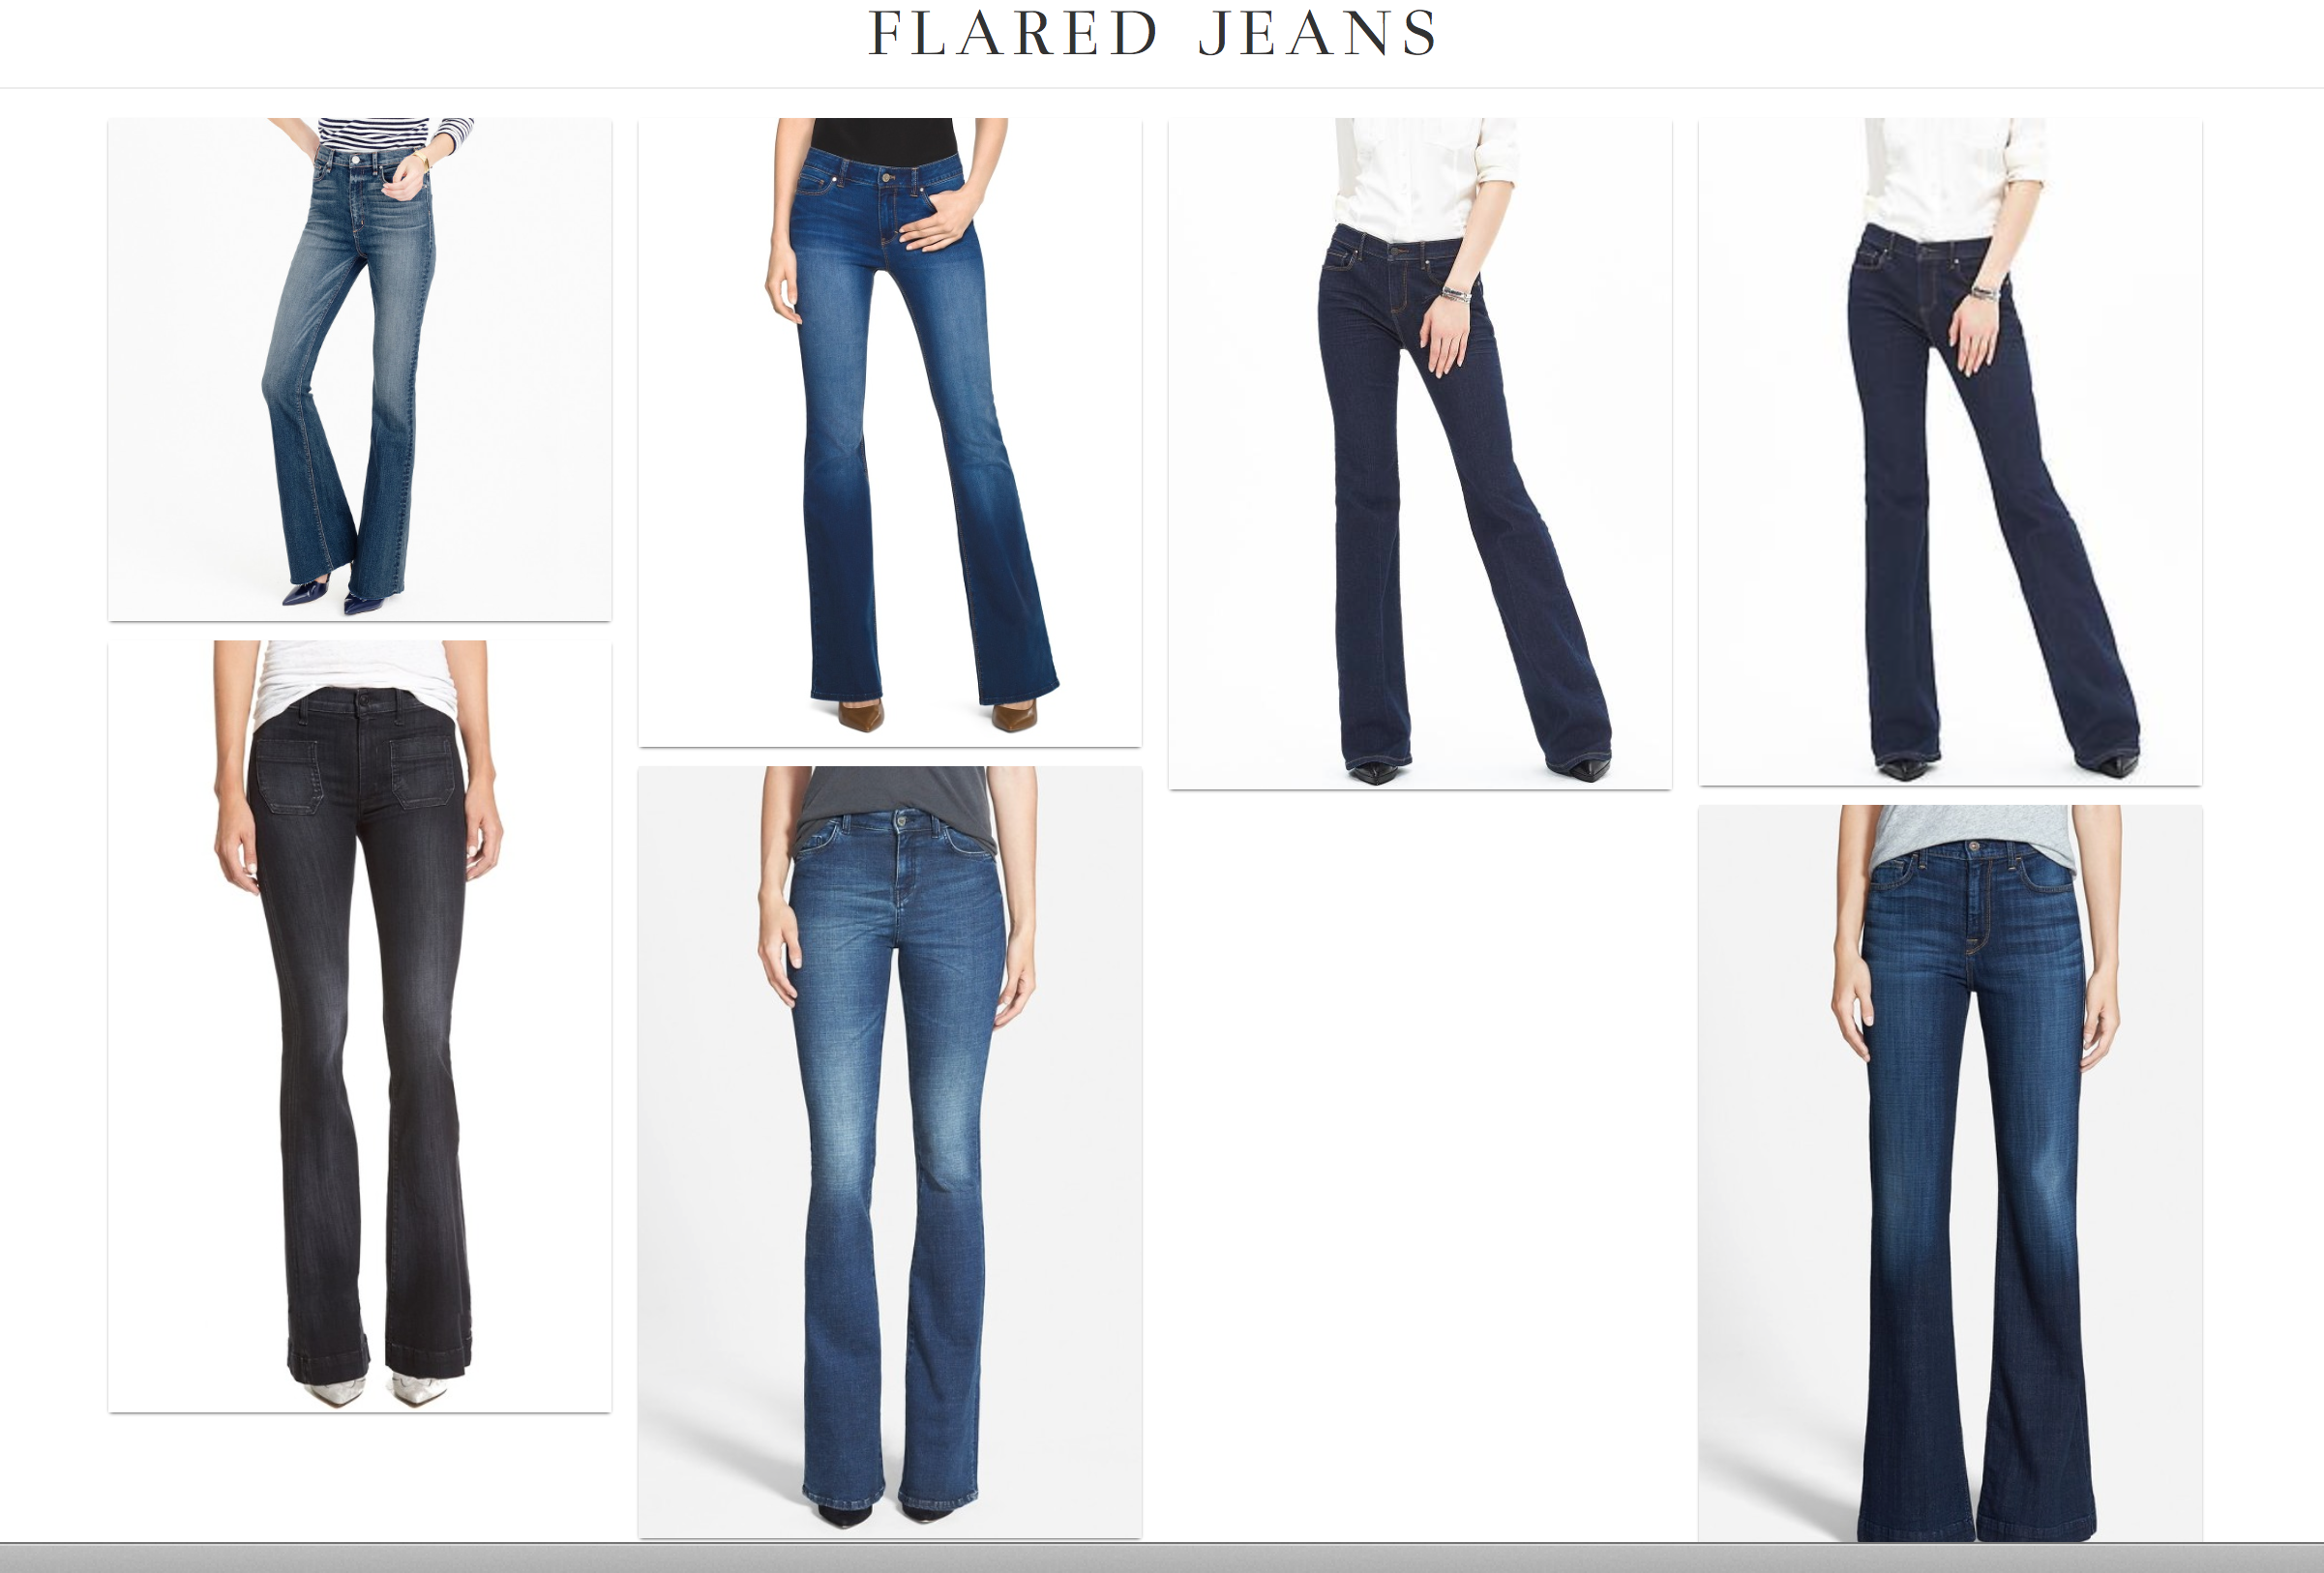 Conway Image Consulting - Flared Jean Options